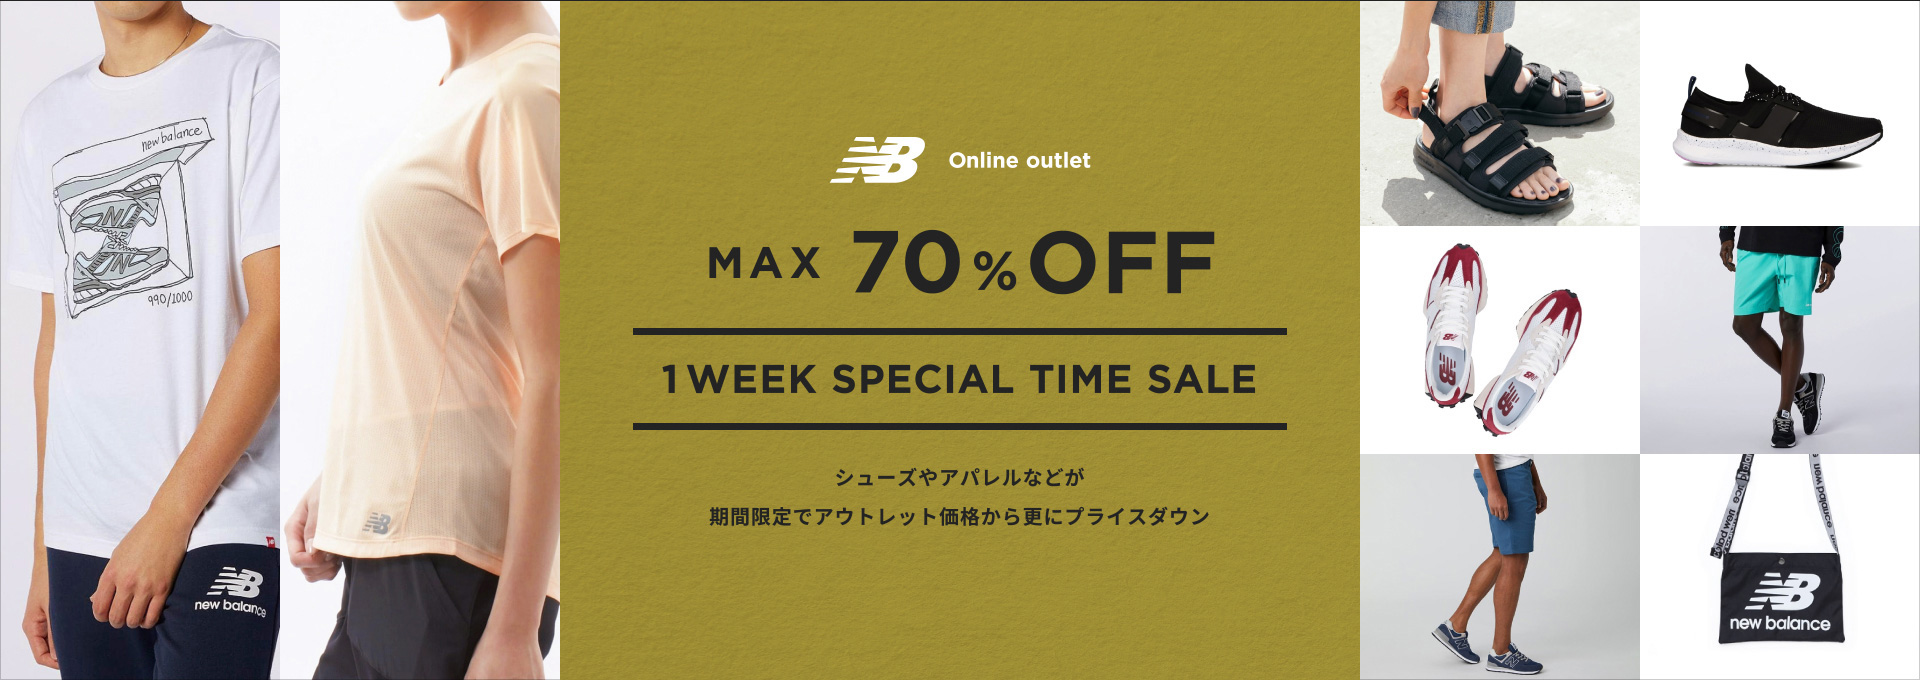 NB Online outlet Max 70% Off 1 Week Special Time Sale.